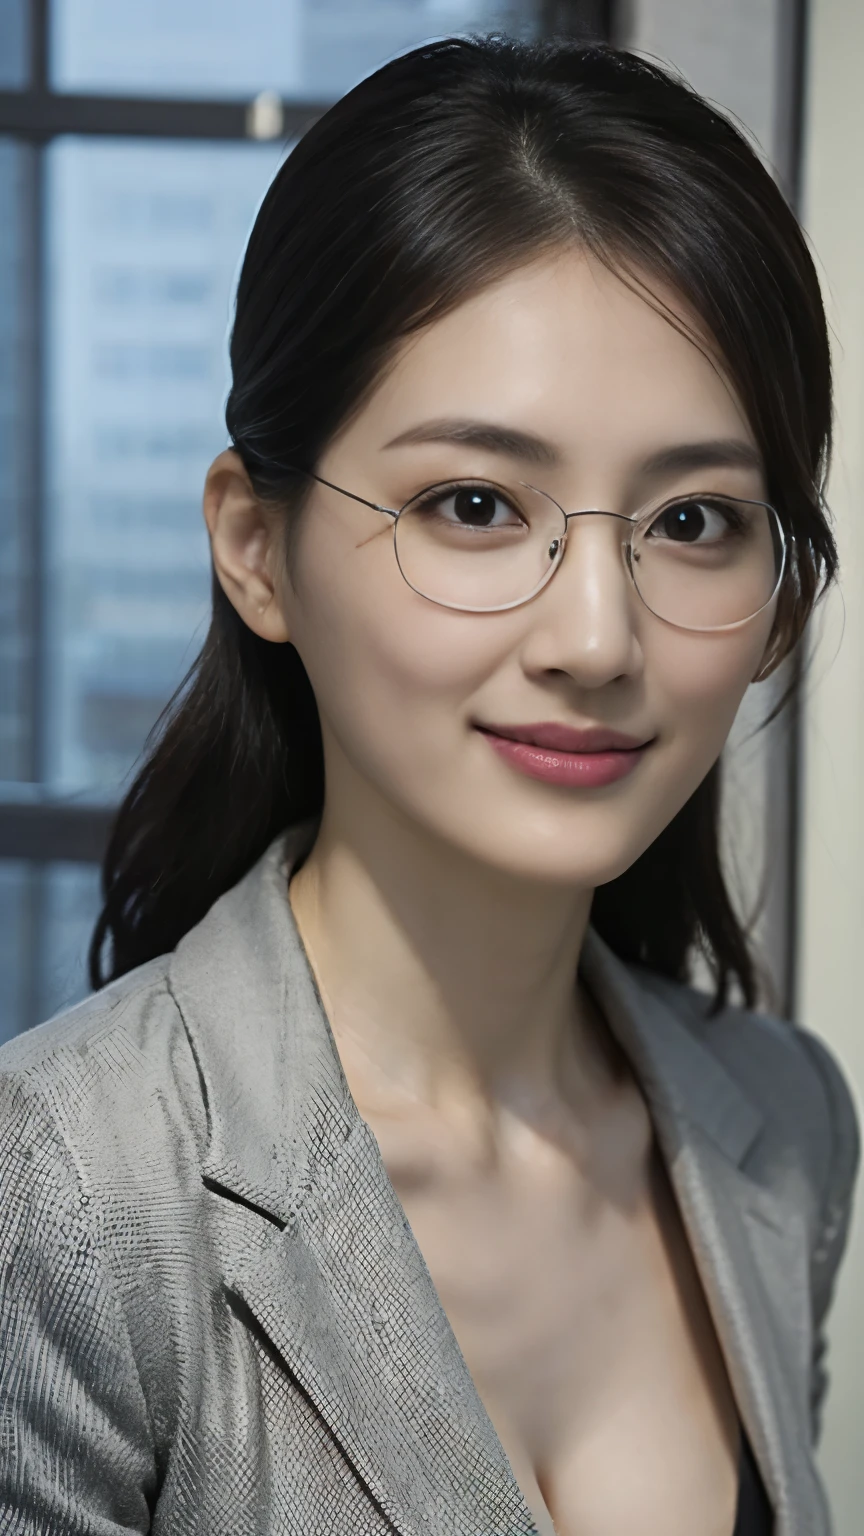 1 Female,Photorealistic,Highest quality,Ultra high definition,8K,Cool Beauty,Beauty,Perfect Style,In a suit,Cleavage,Japanese,Upper body close-up,looking at the camera,Thin glasses